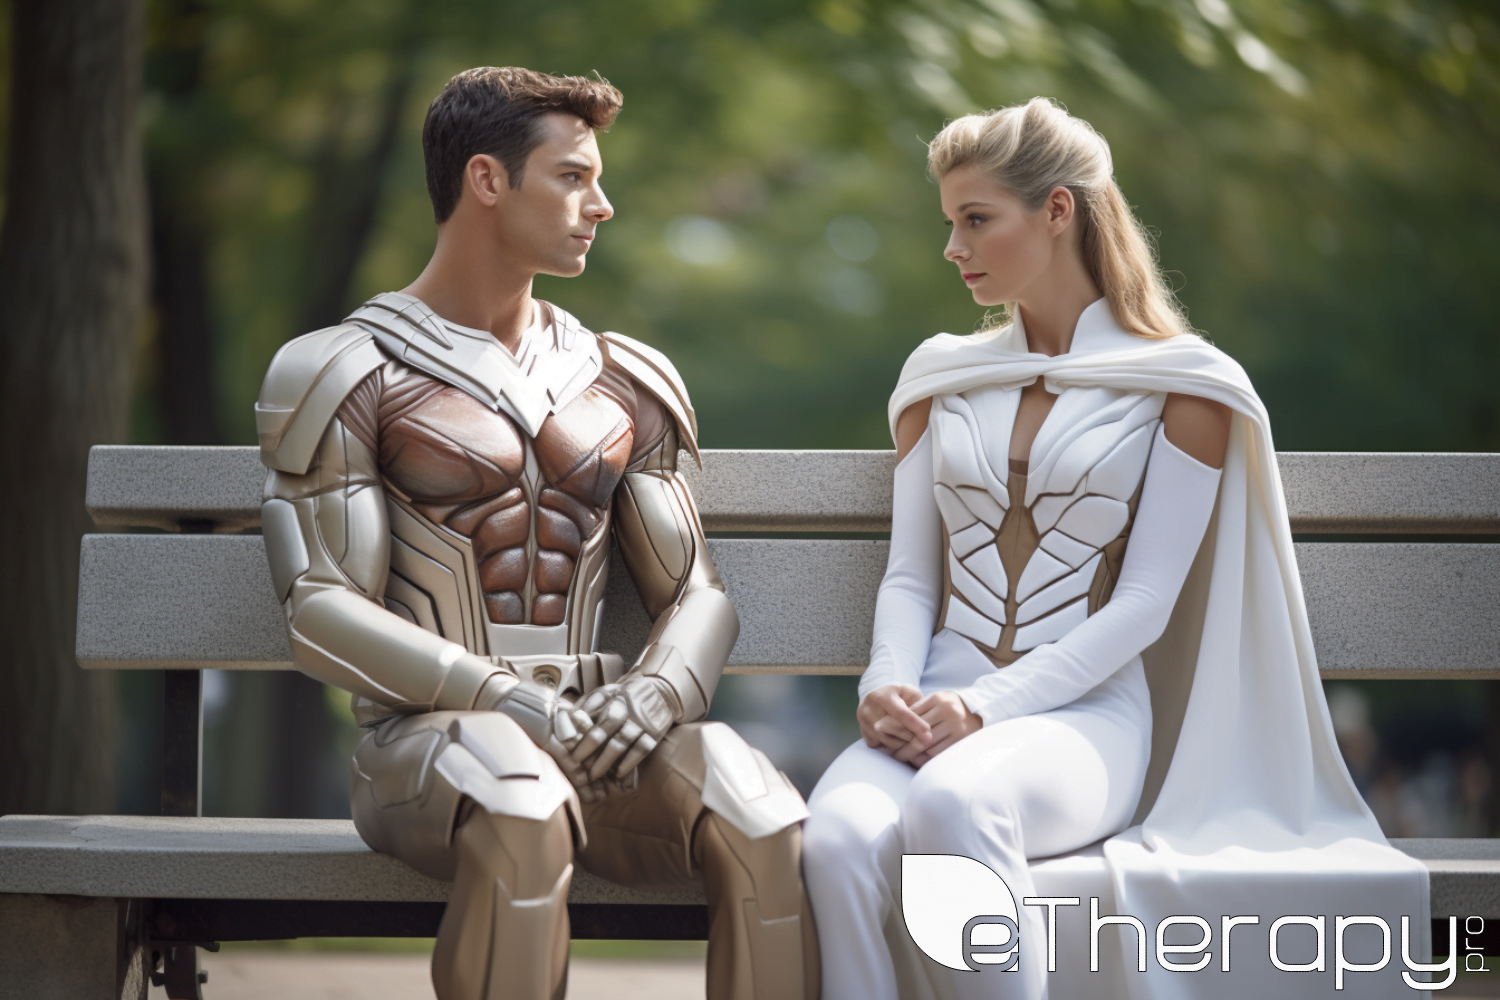 two costumed figures seeing each other - the savior complex why do we seek heroes in love